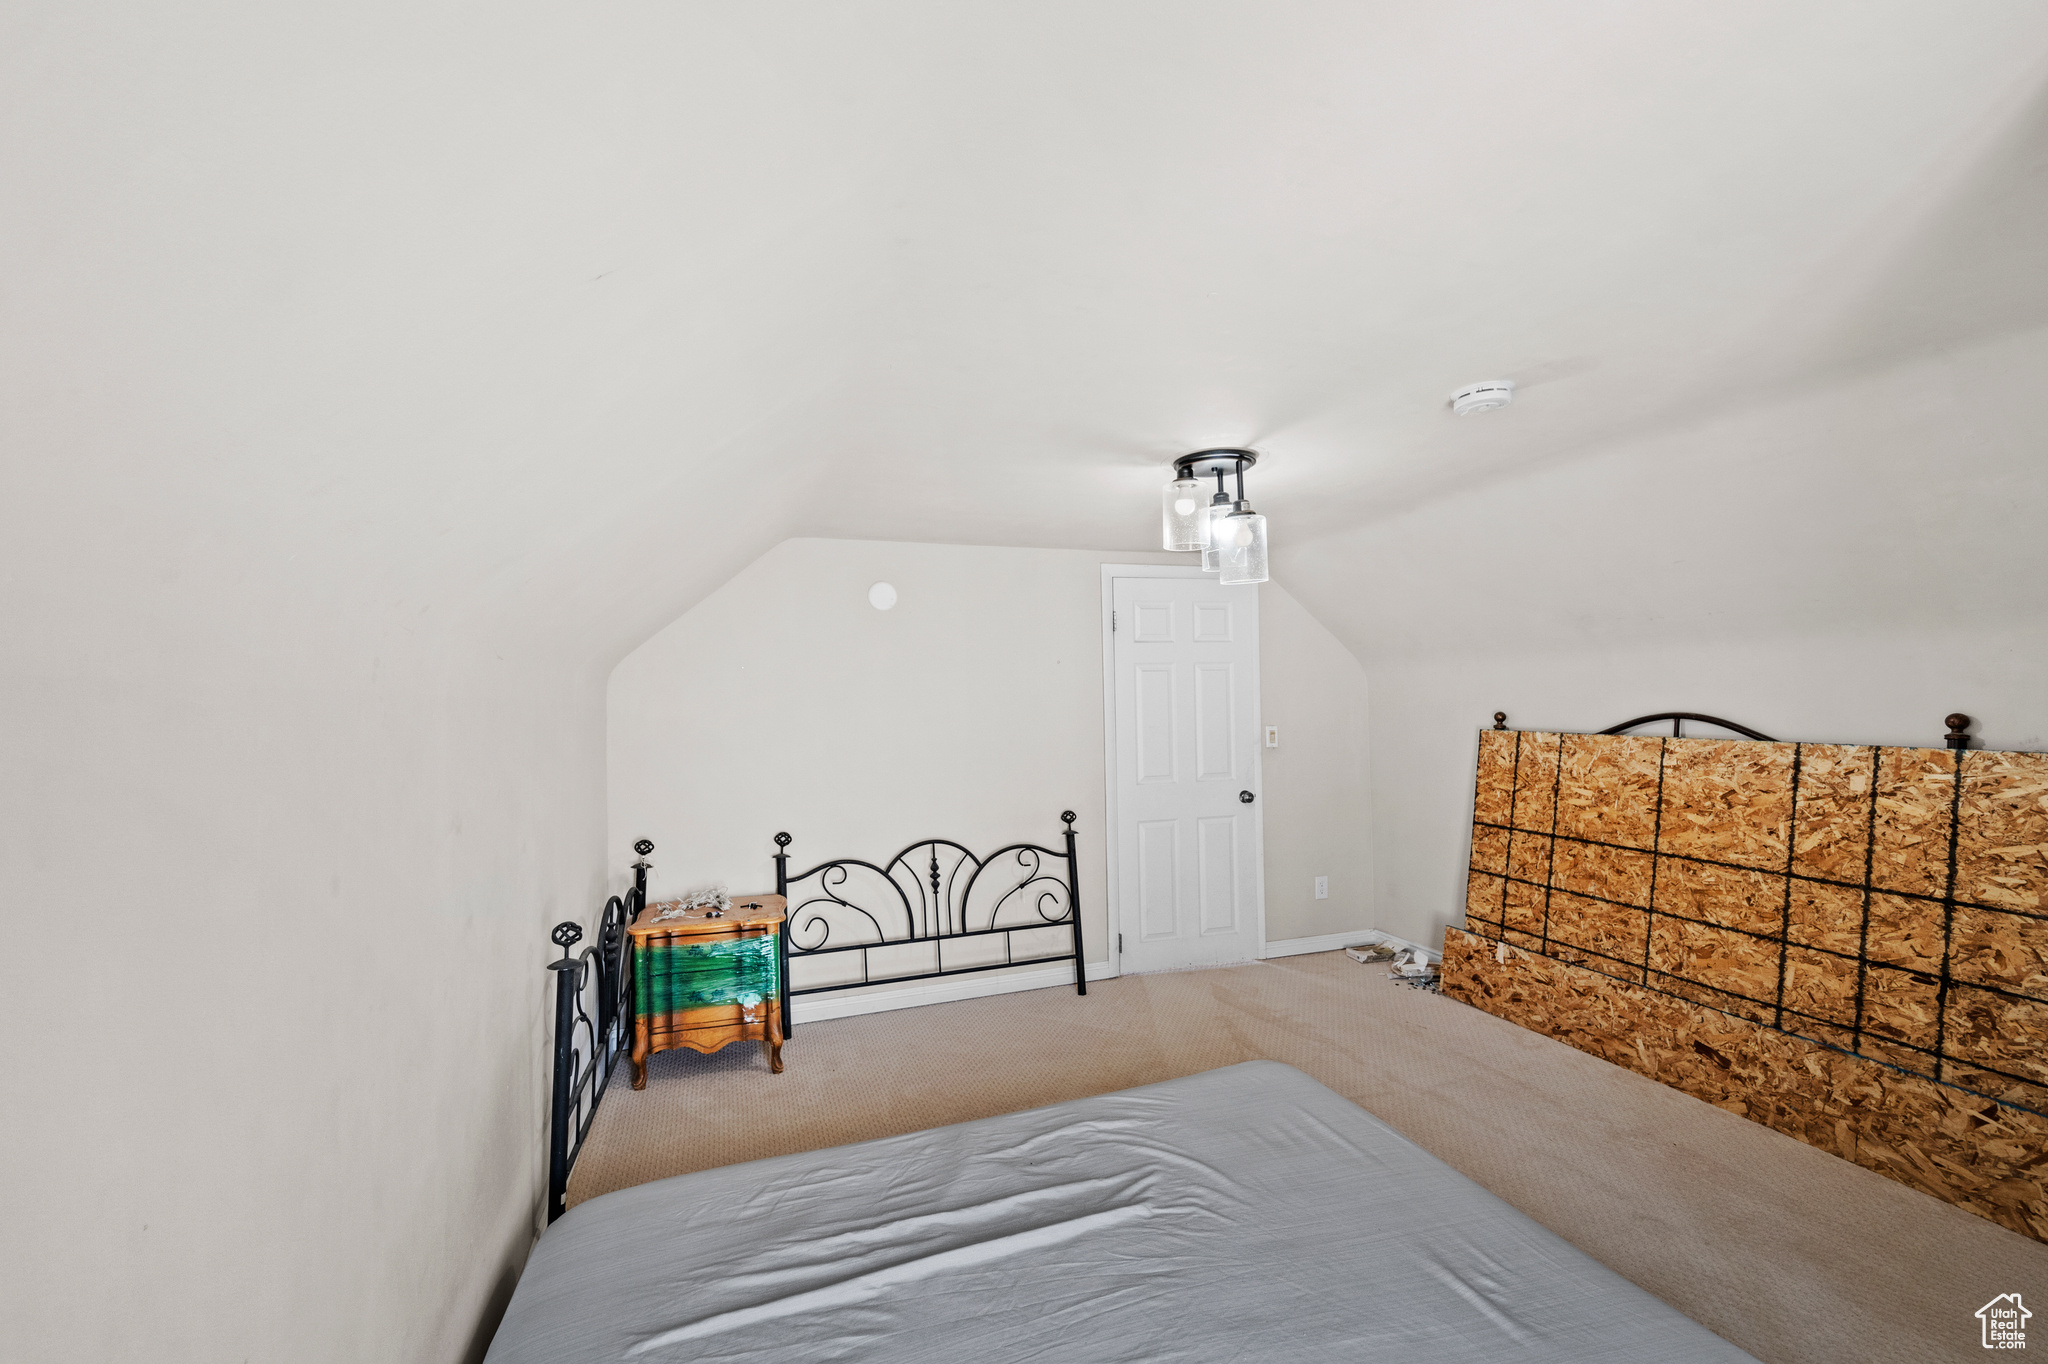 Bedroom with lofted ceiling and carpet flooring